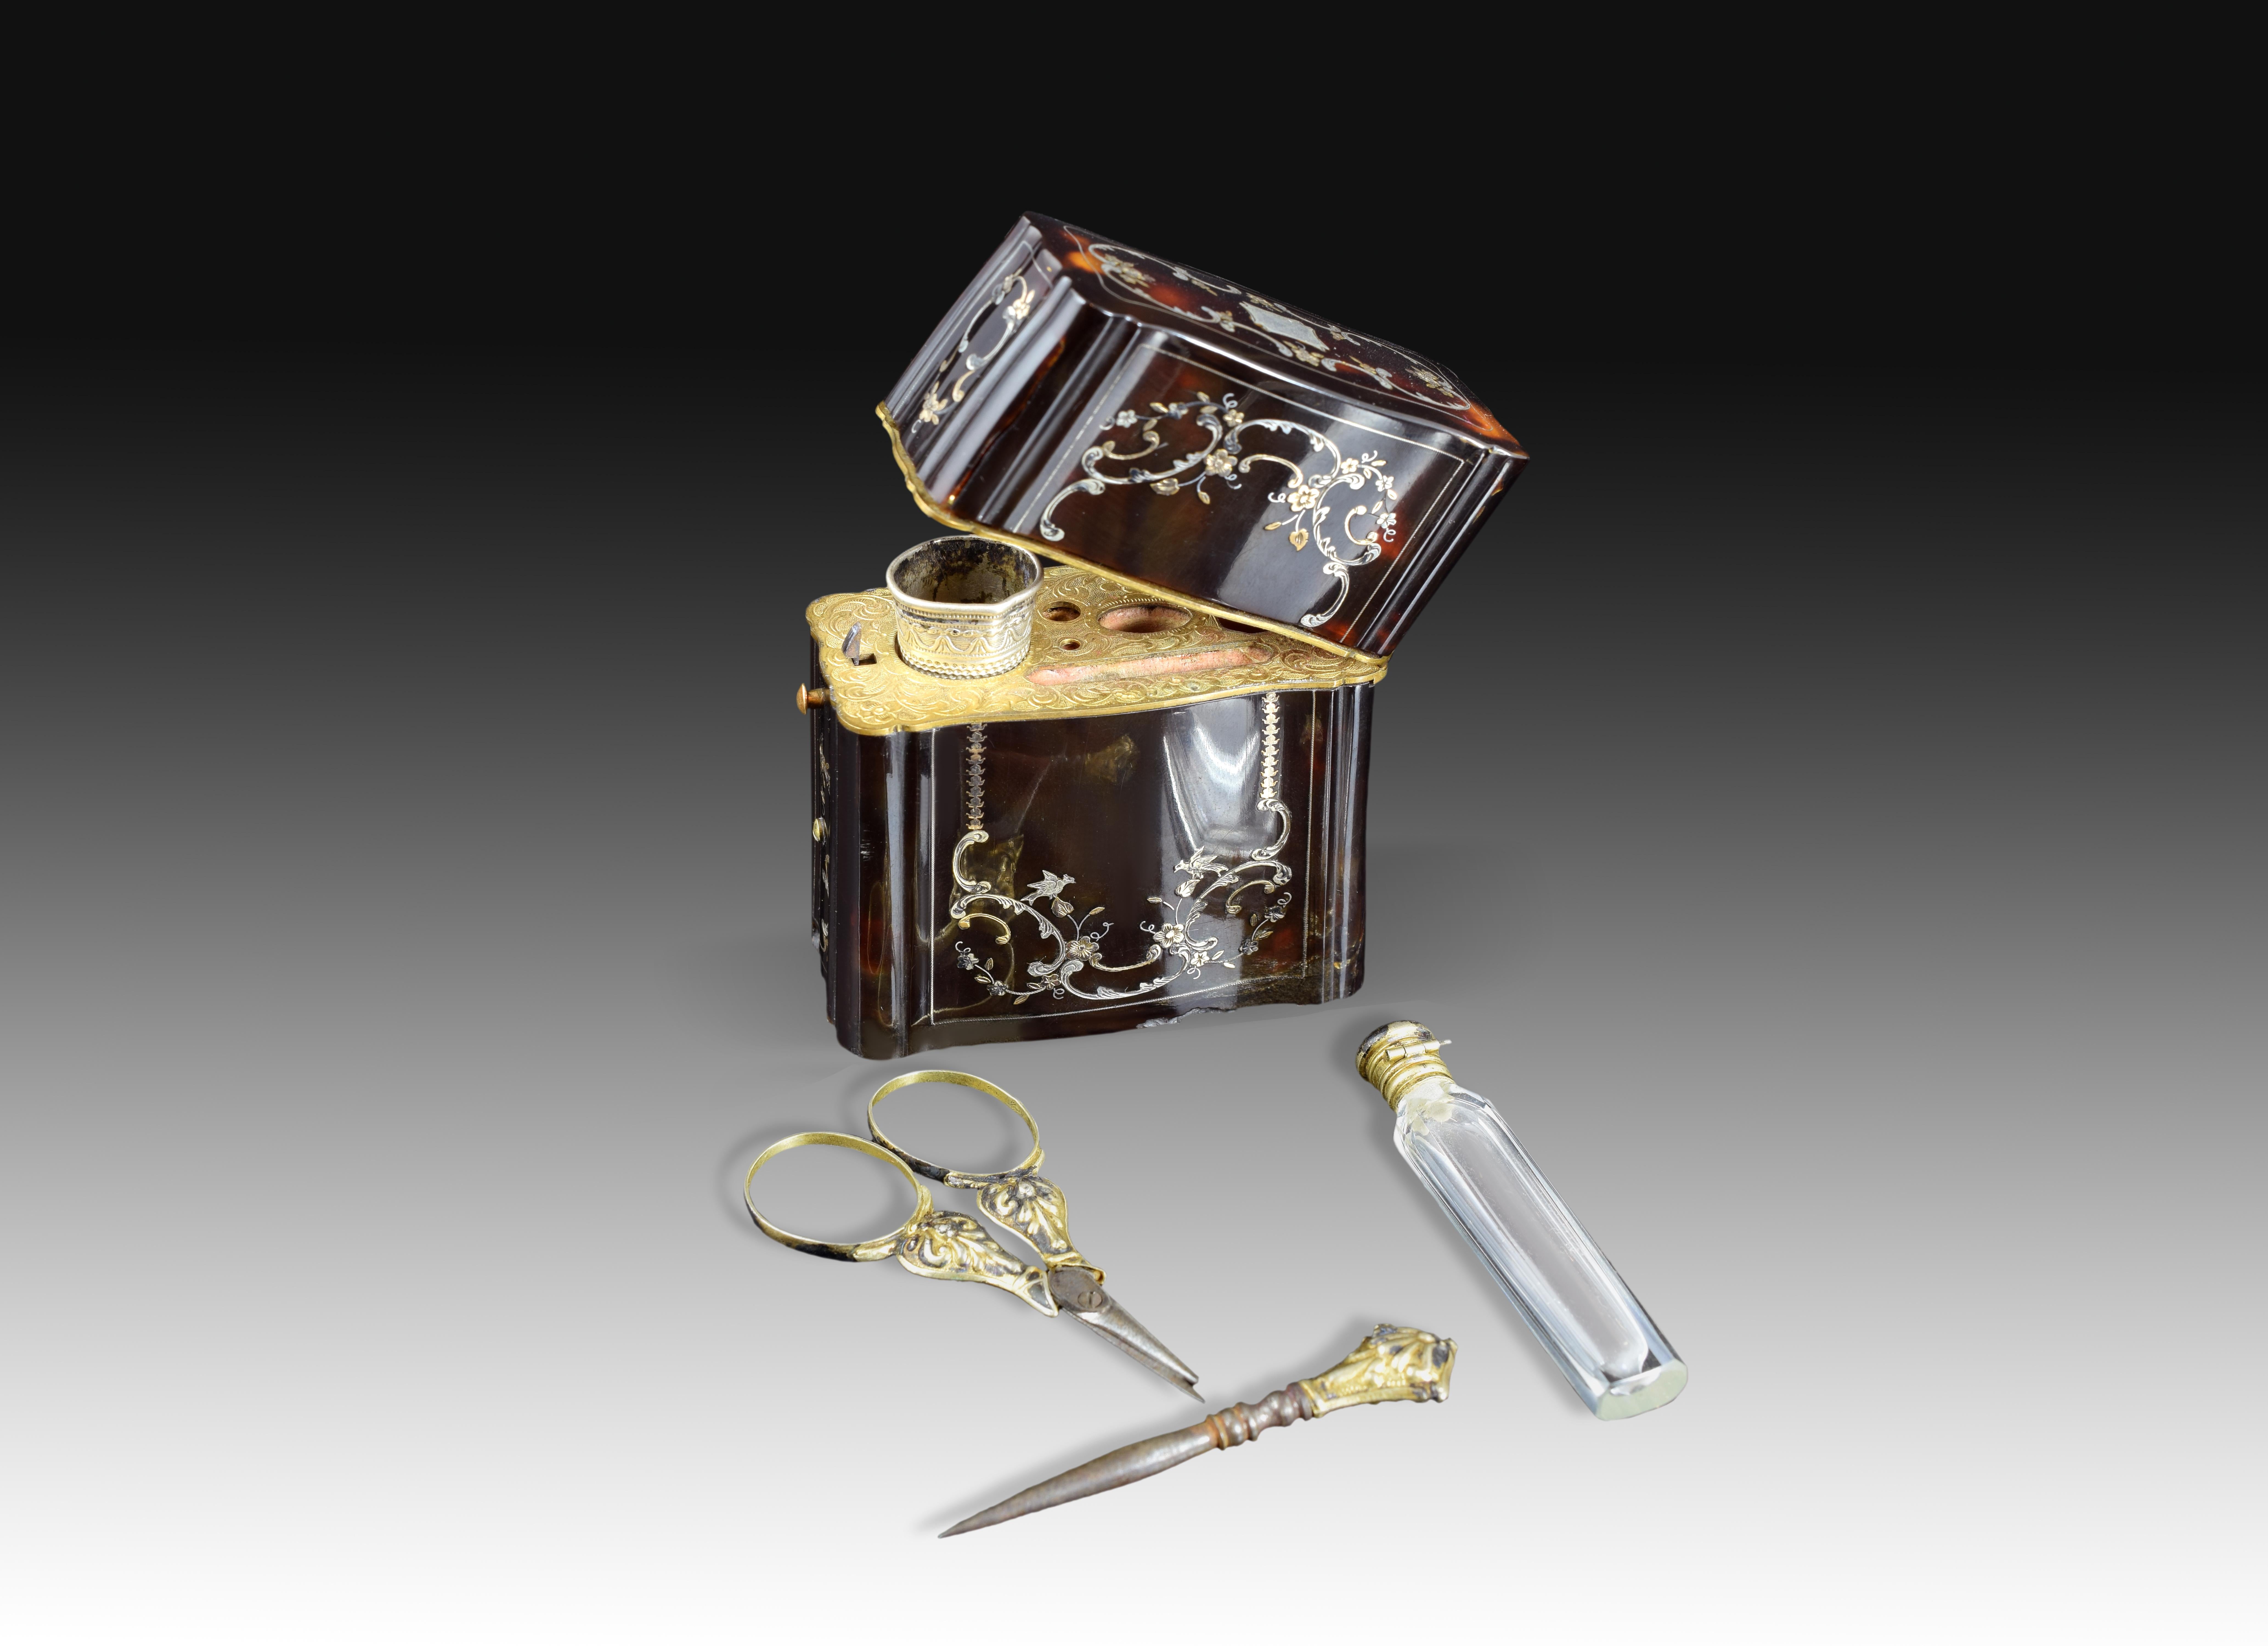 Rectangular case with hinged lid made decorated with fine inlays of floral and floral elements on its faces, containing a set of toiletry set composed of various elements of grooming and personal use (a small bottle of perfumes, scissors, a thimble